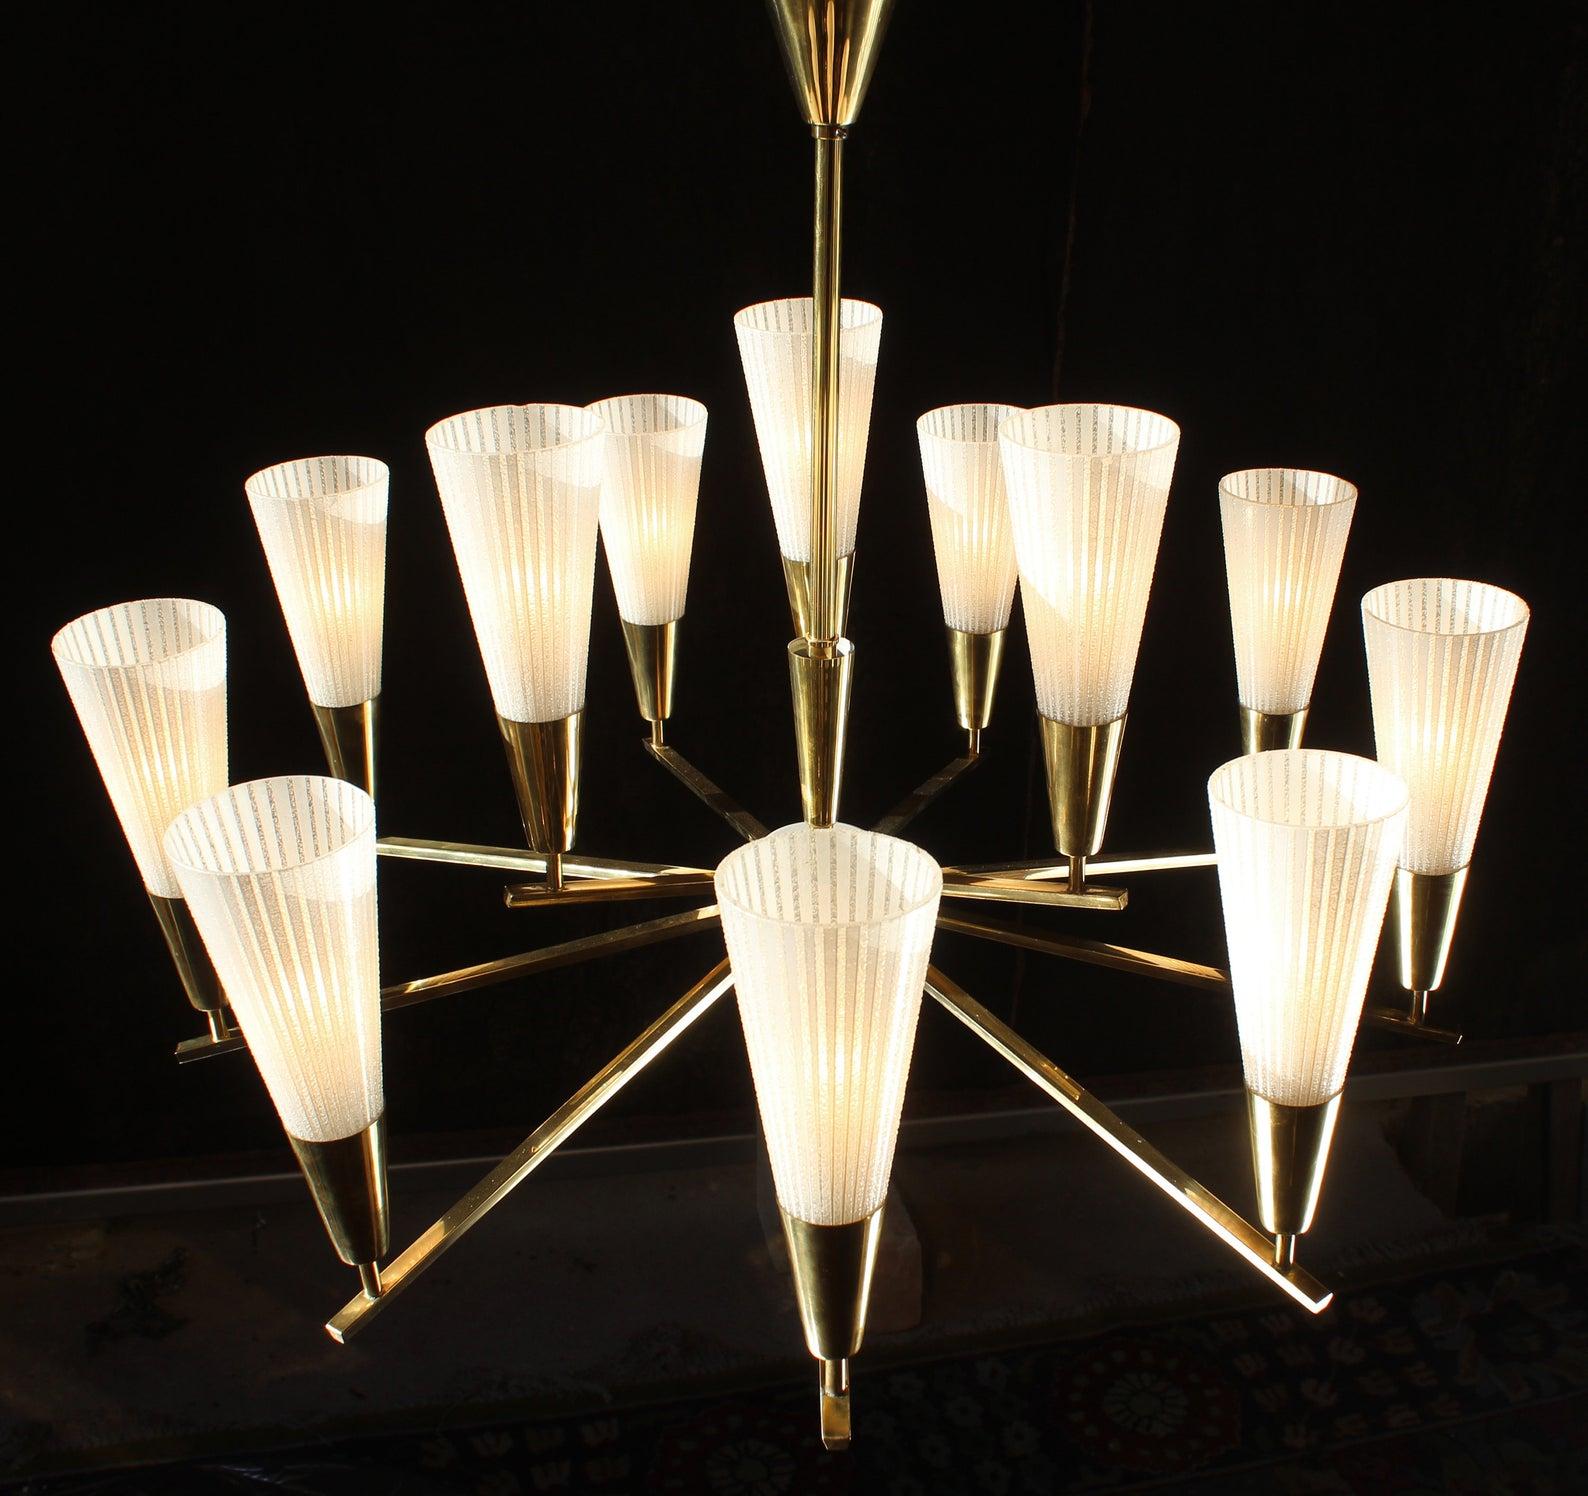 12-light chandelier, 1960, Stilnovo type

Polished brass and moulded conus glass blossoms

This fine Italian brass and glass chandelier is in fine original constitution with fine patina. The 12 (+2 for reserve) filigree moulded and hand-enameled